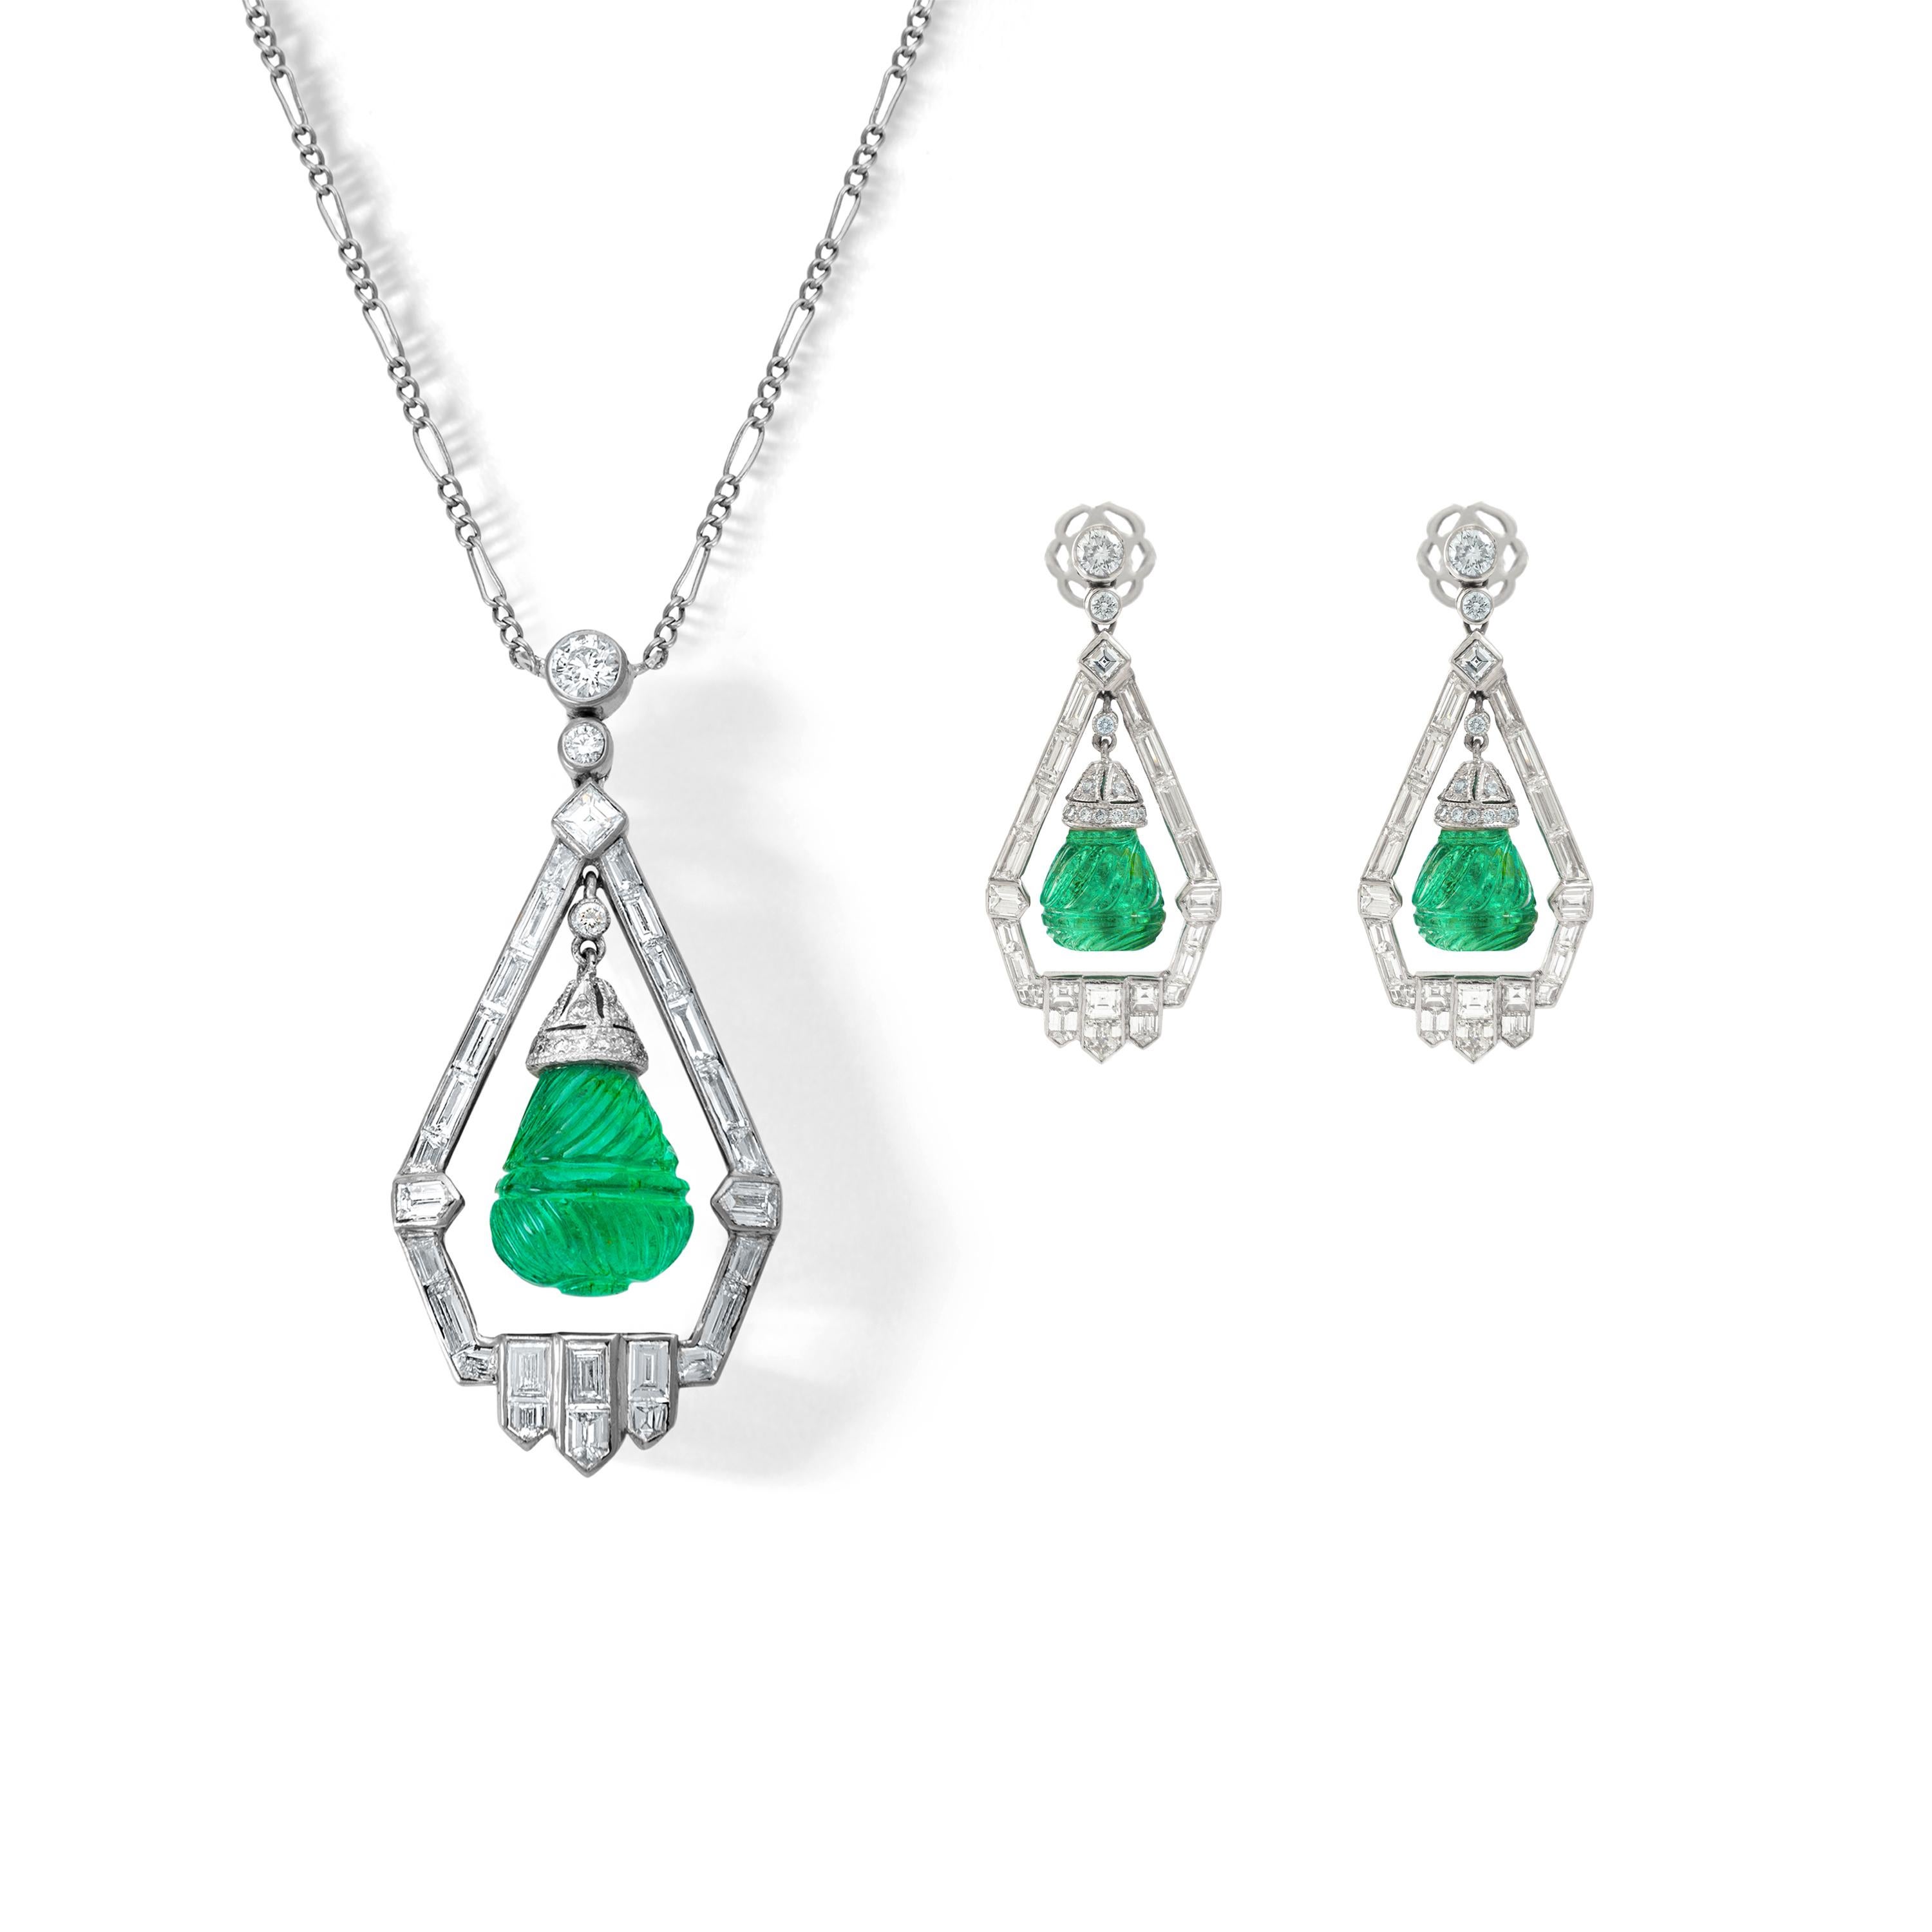 Art Deco design Demi-Parure including Ear Pendants and a Pendant in Platinum and Diamond (baguette cut and round cut) holding engraved Emeralds.

Earrings Length: 1.58 inch (4.00 centimeters)
Earrings total weight: 12.92 grams.

Pendant length: 1.77